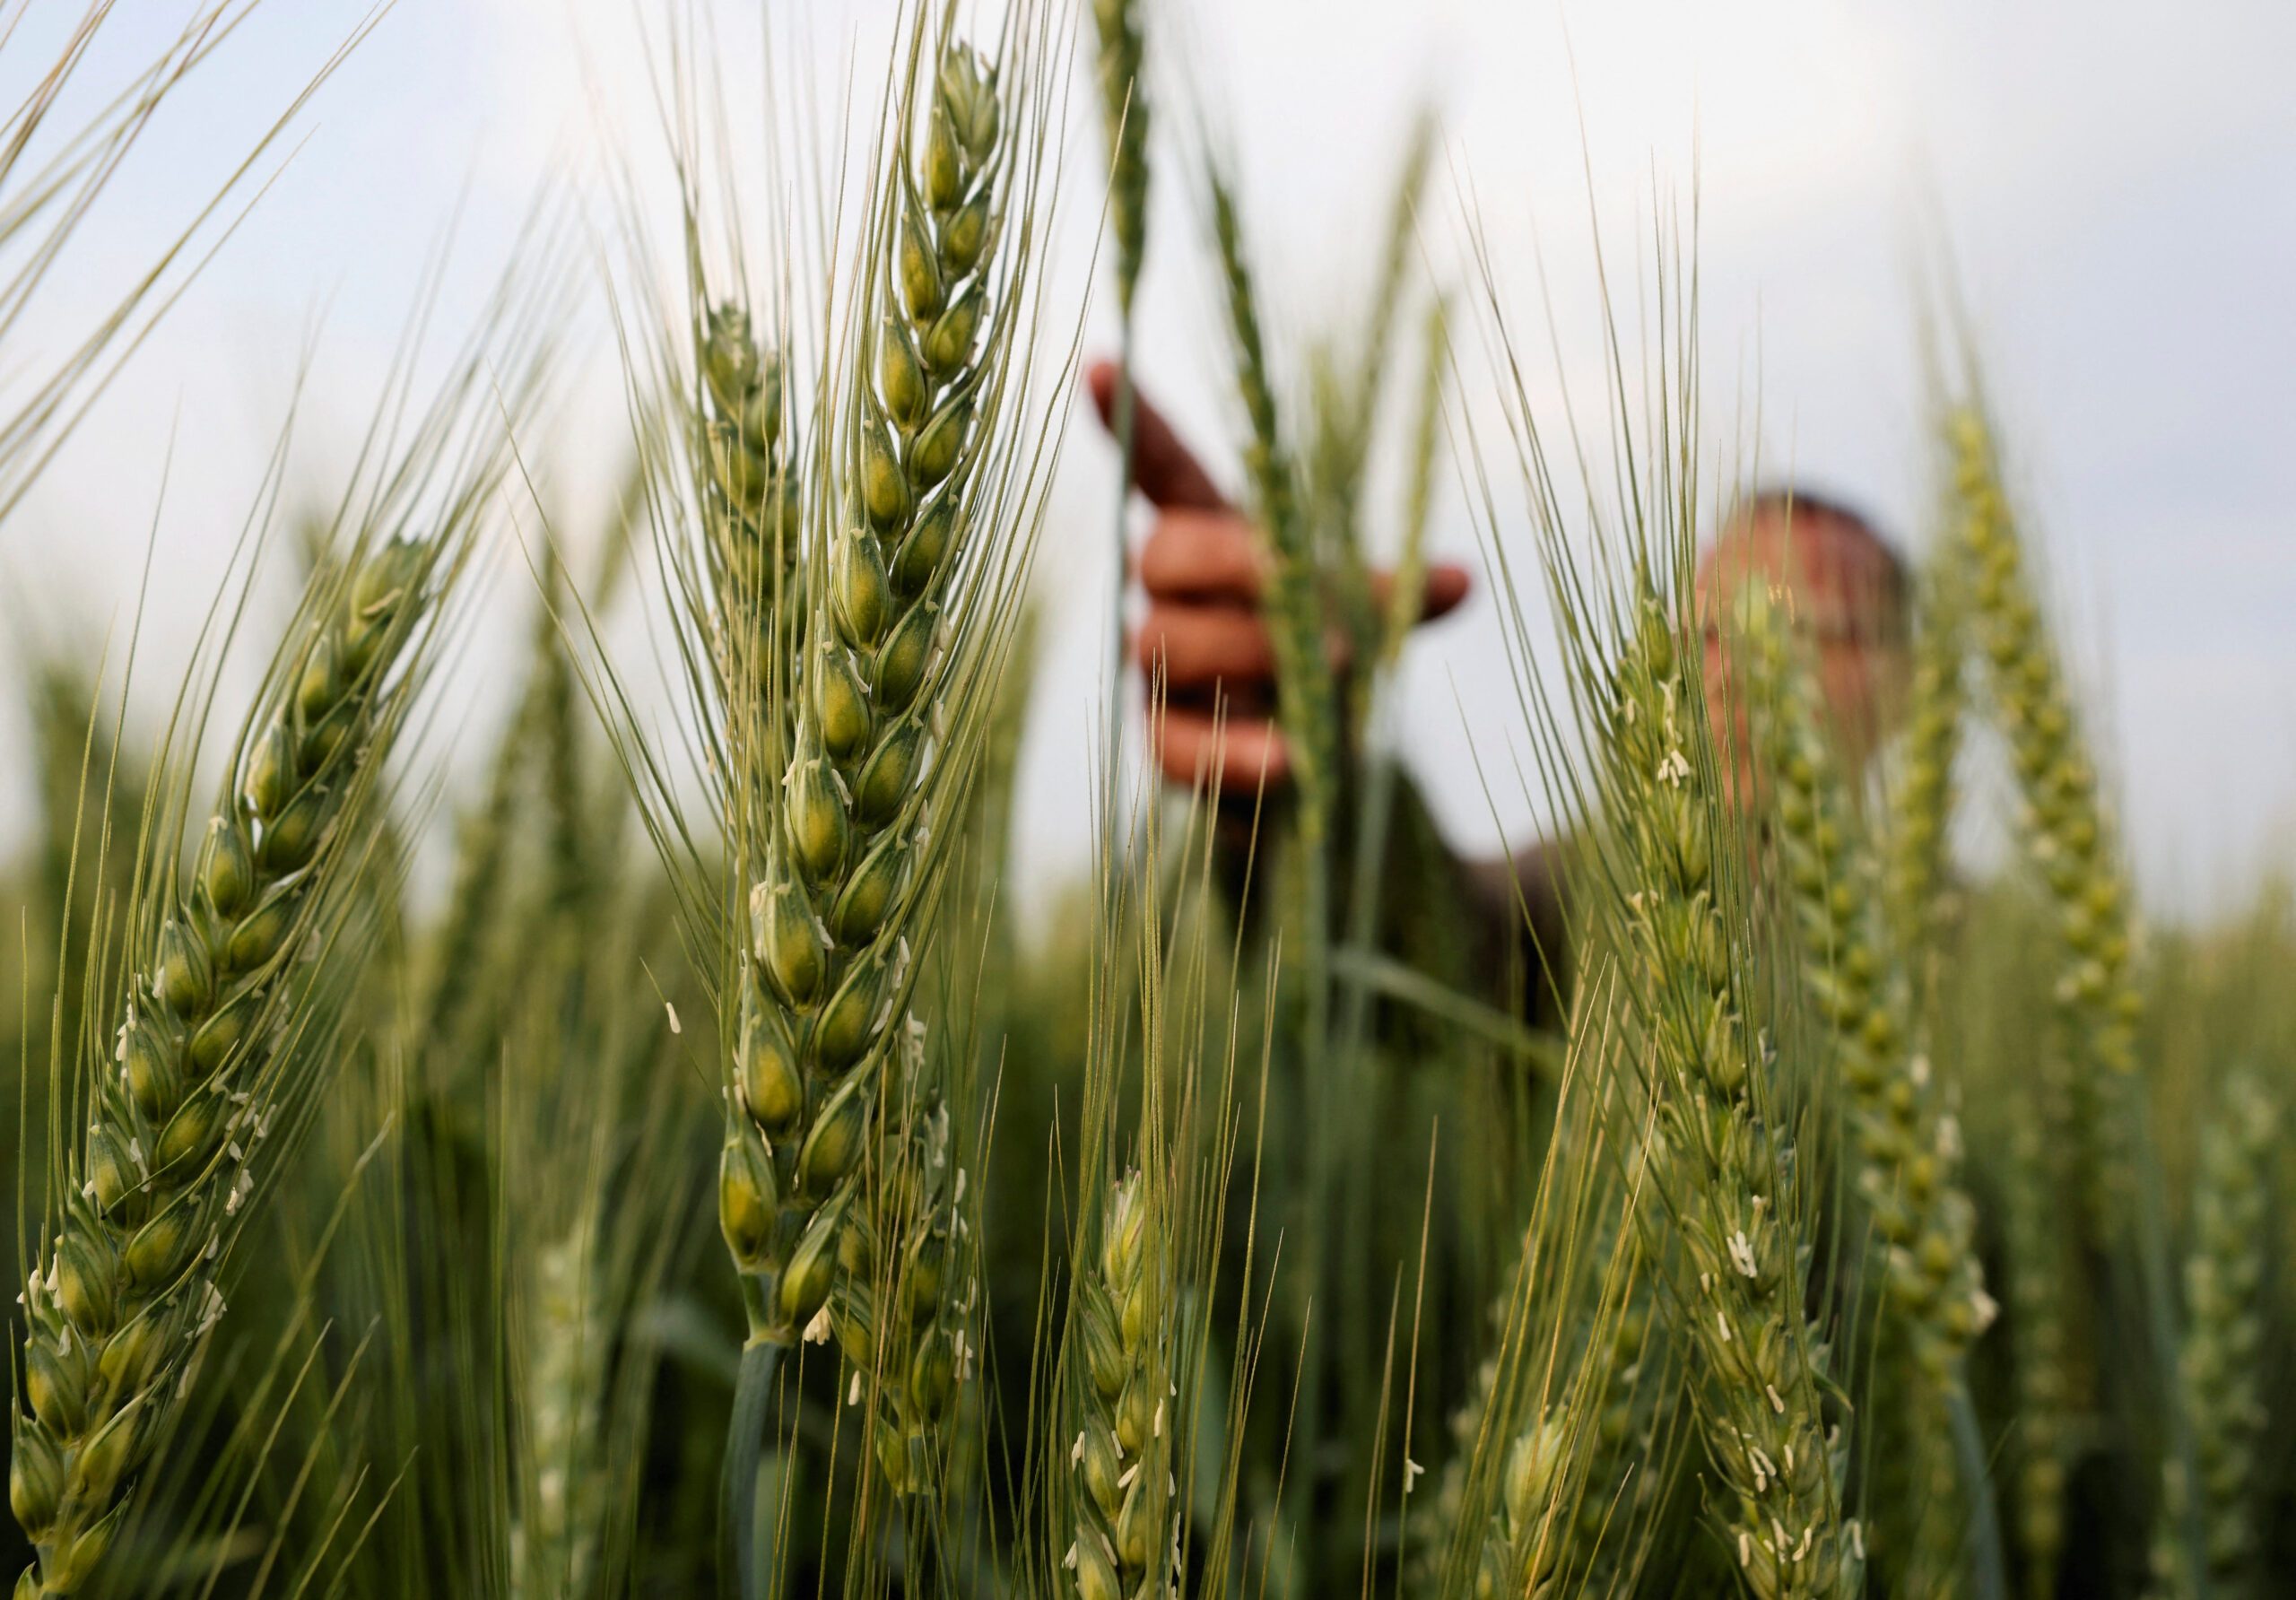 Talks between Egypt and the UAE over the loan deal to purchase wheat from Kazakhstan are in early stages